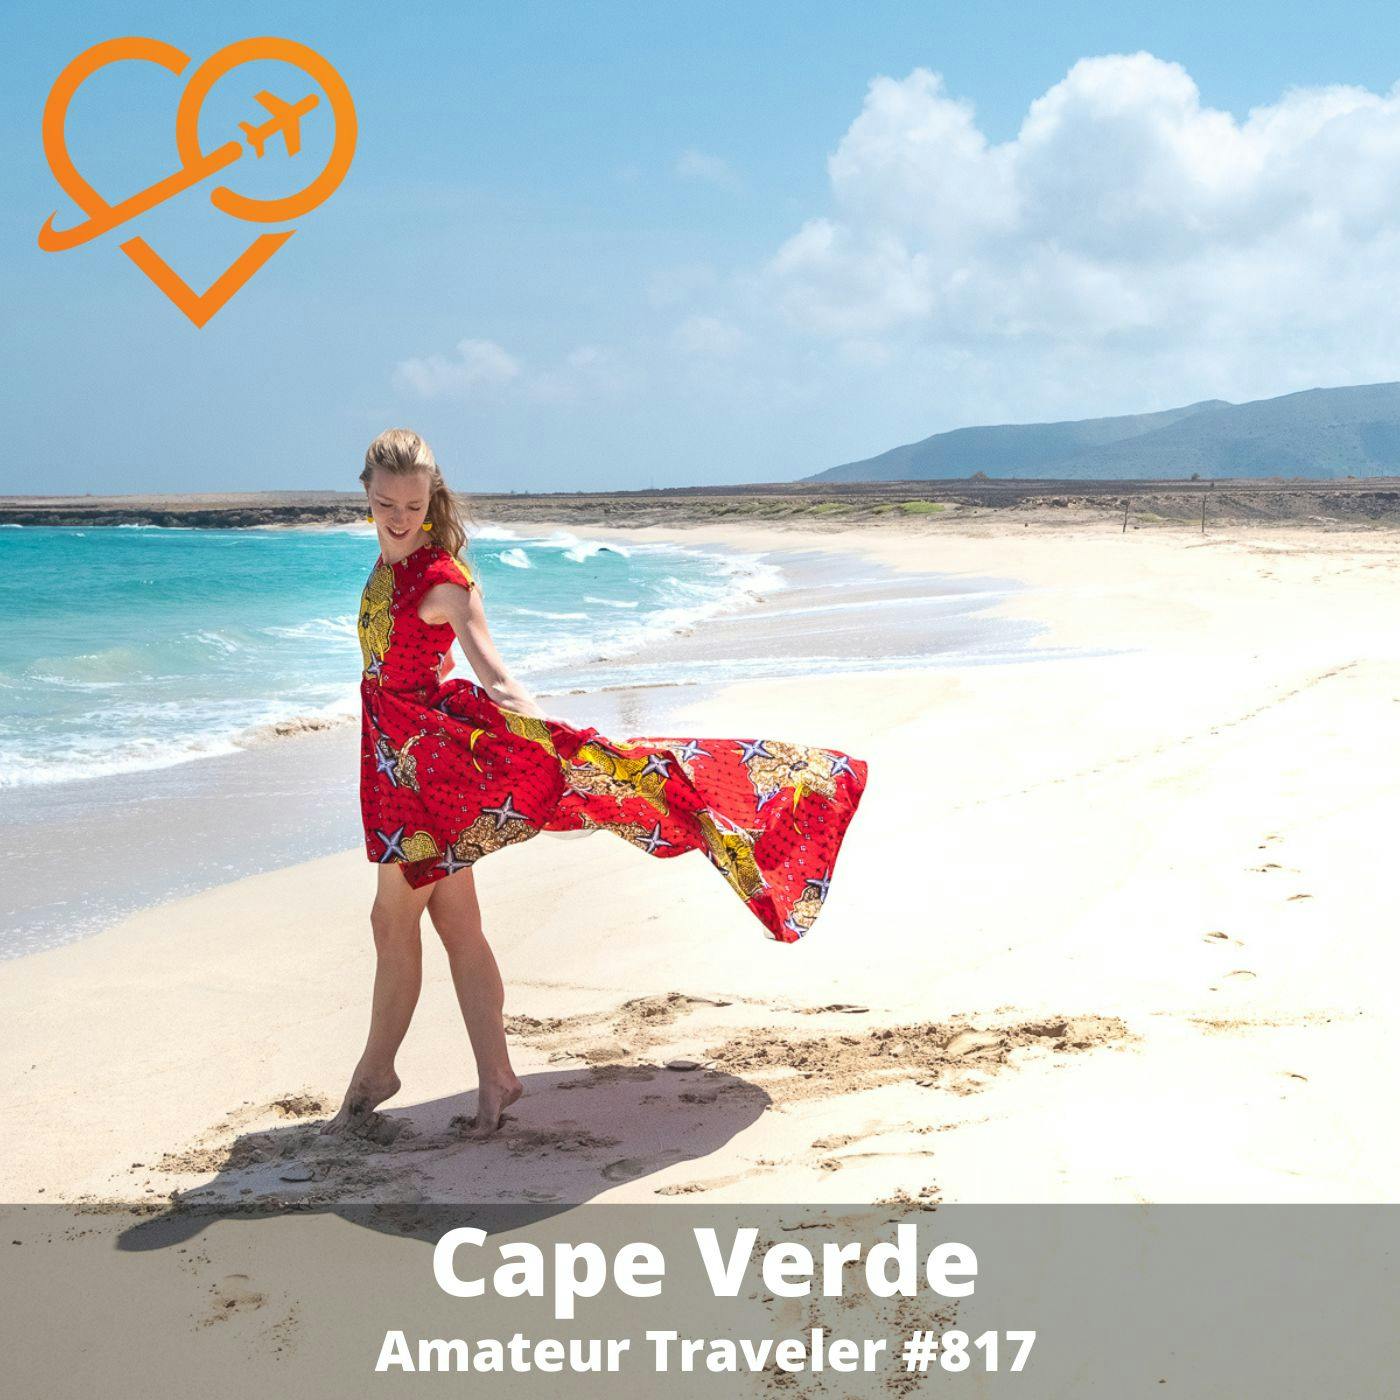 AT#817 - Travel to Cape Verde